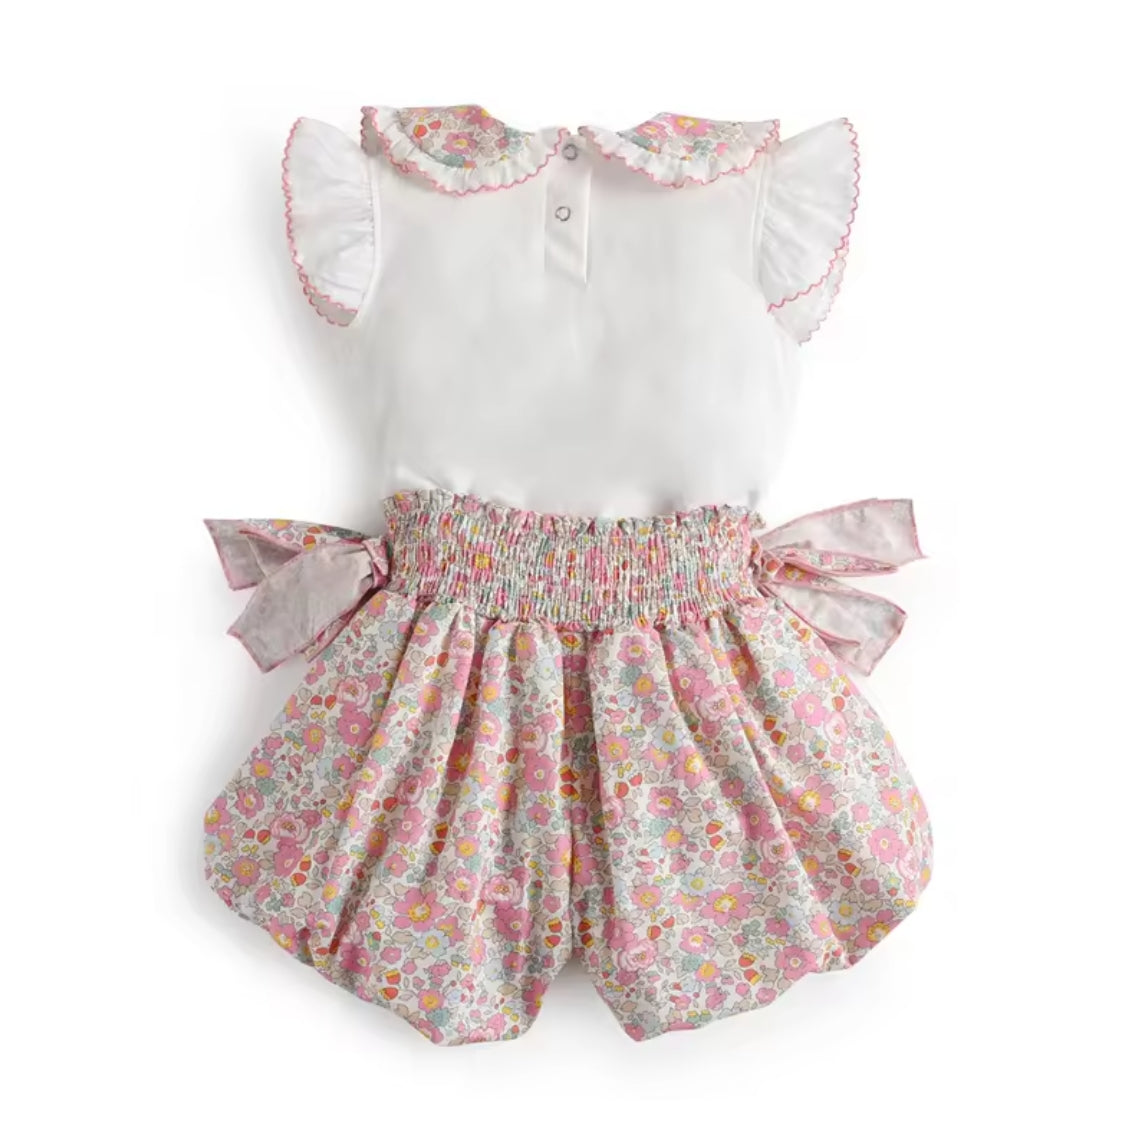 Top with Floral Panty Shorts Suit Baby Girls Clothes Set